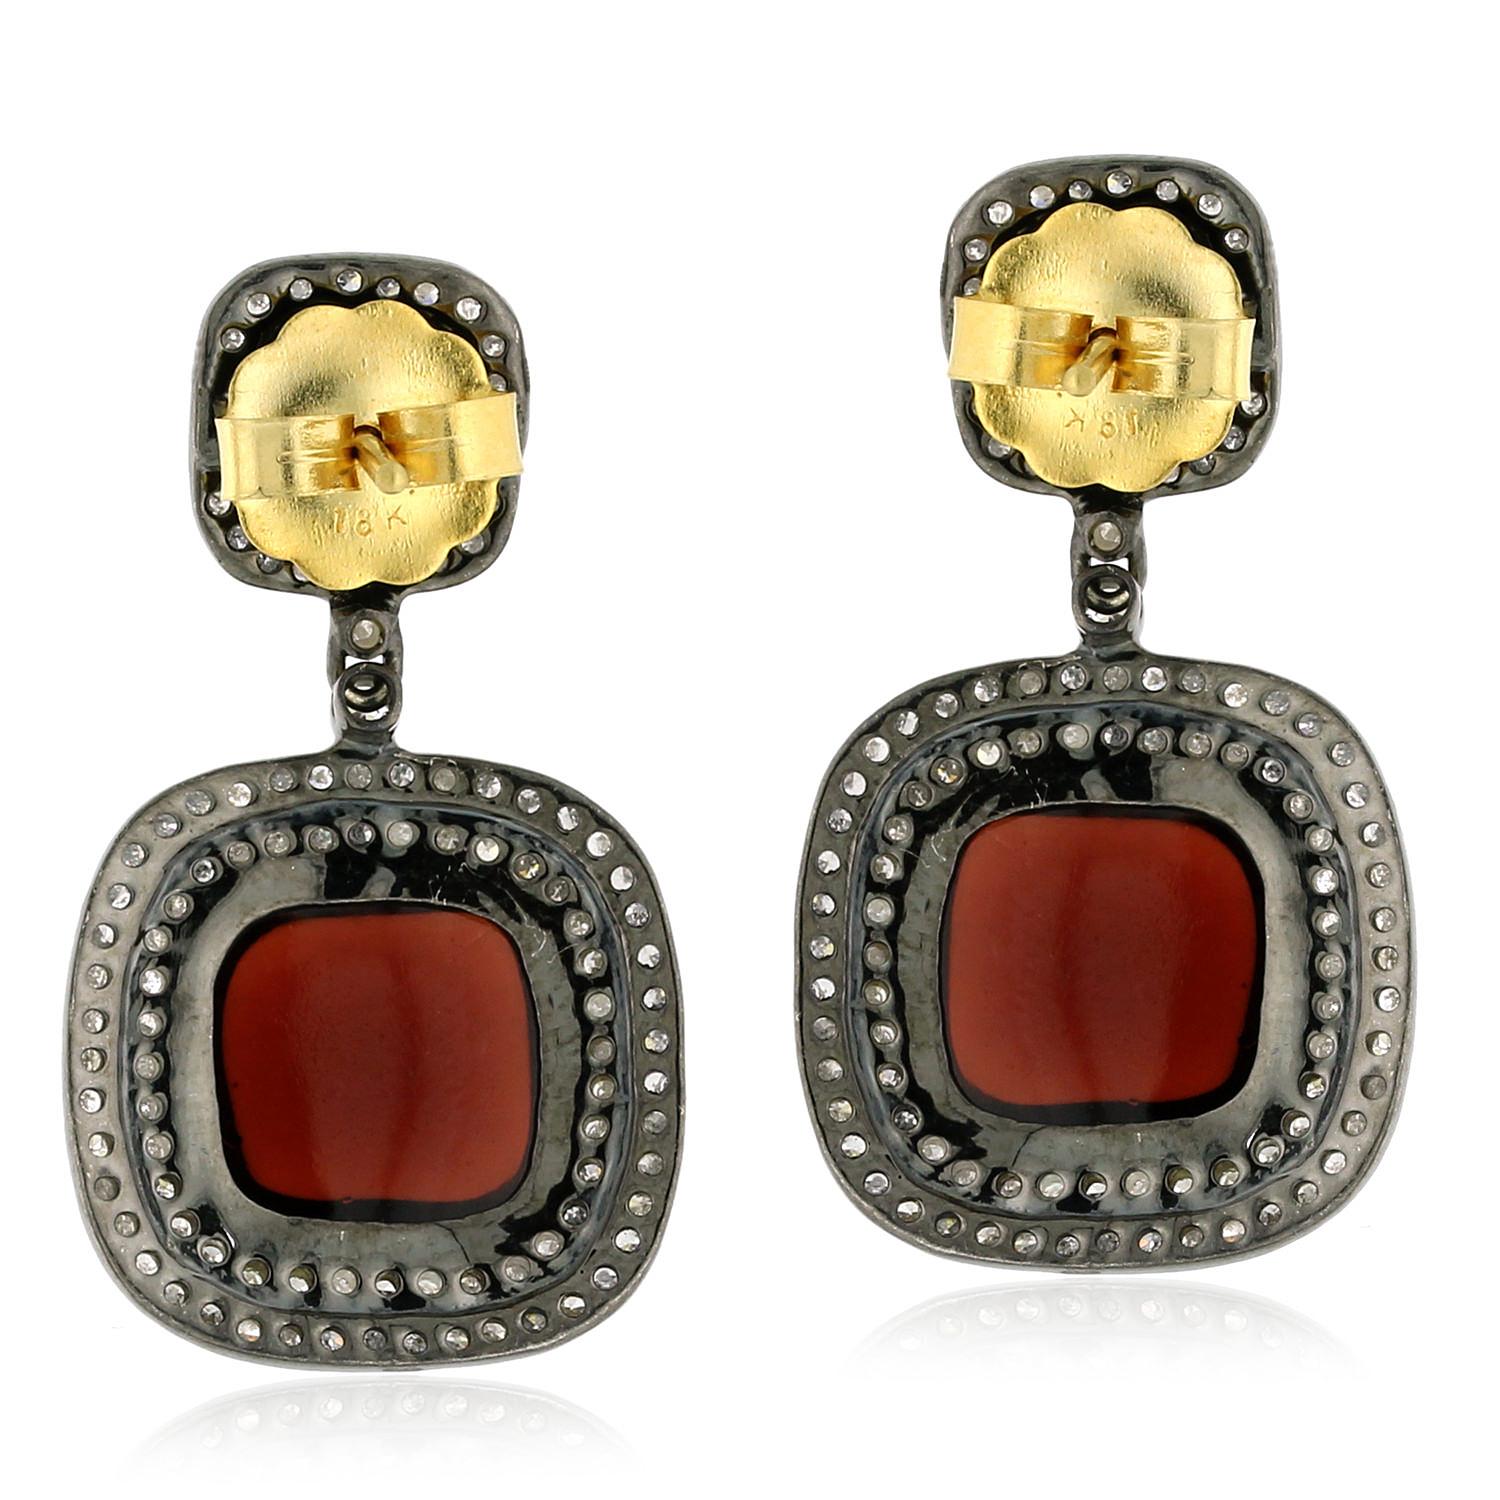 Add a pop of color to your jewelry collection with these beautiful Cushion Shaped Garnet & Tsavorite Earrings. Expertly crafted in 18k gold and silver, these earrings feature cushion shaped garnet and tsavorite gemstones, set in elegant and timeless